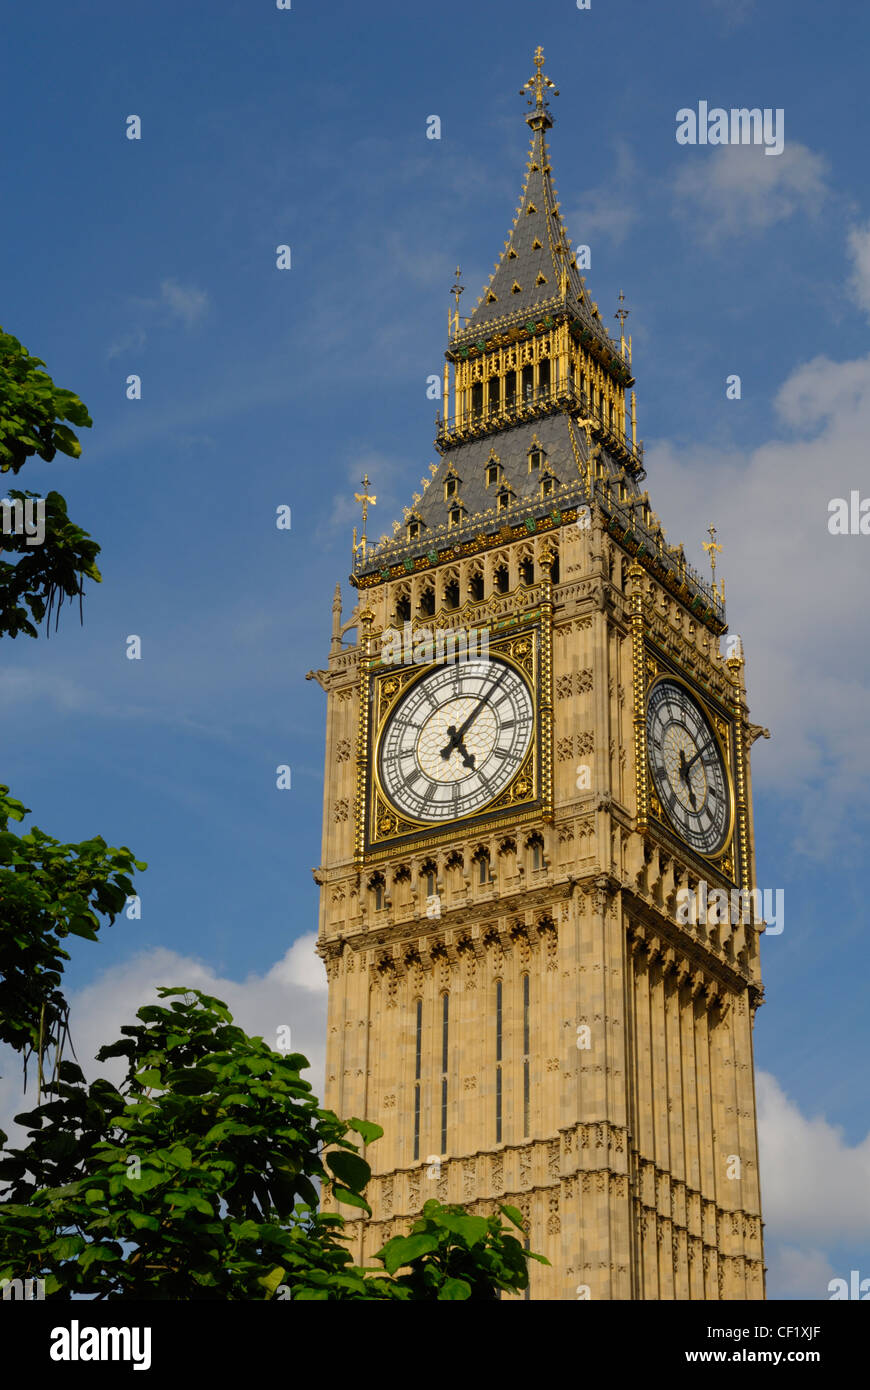 Big Ben, one of London's most iconic landmarks, against a blue sky. Big Ben is actually the name of the Great Bell in the clock Stock Photo